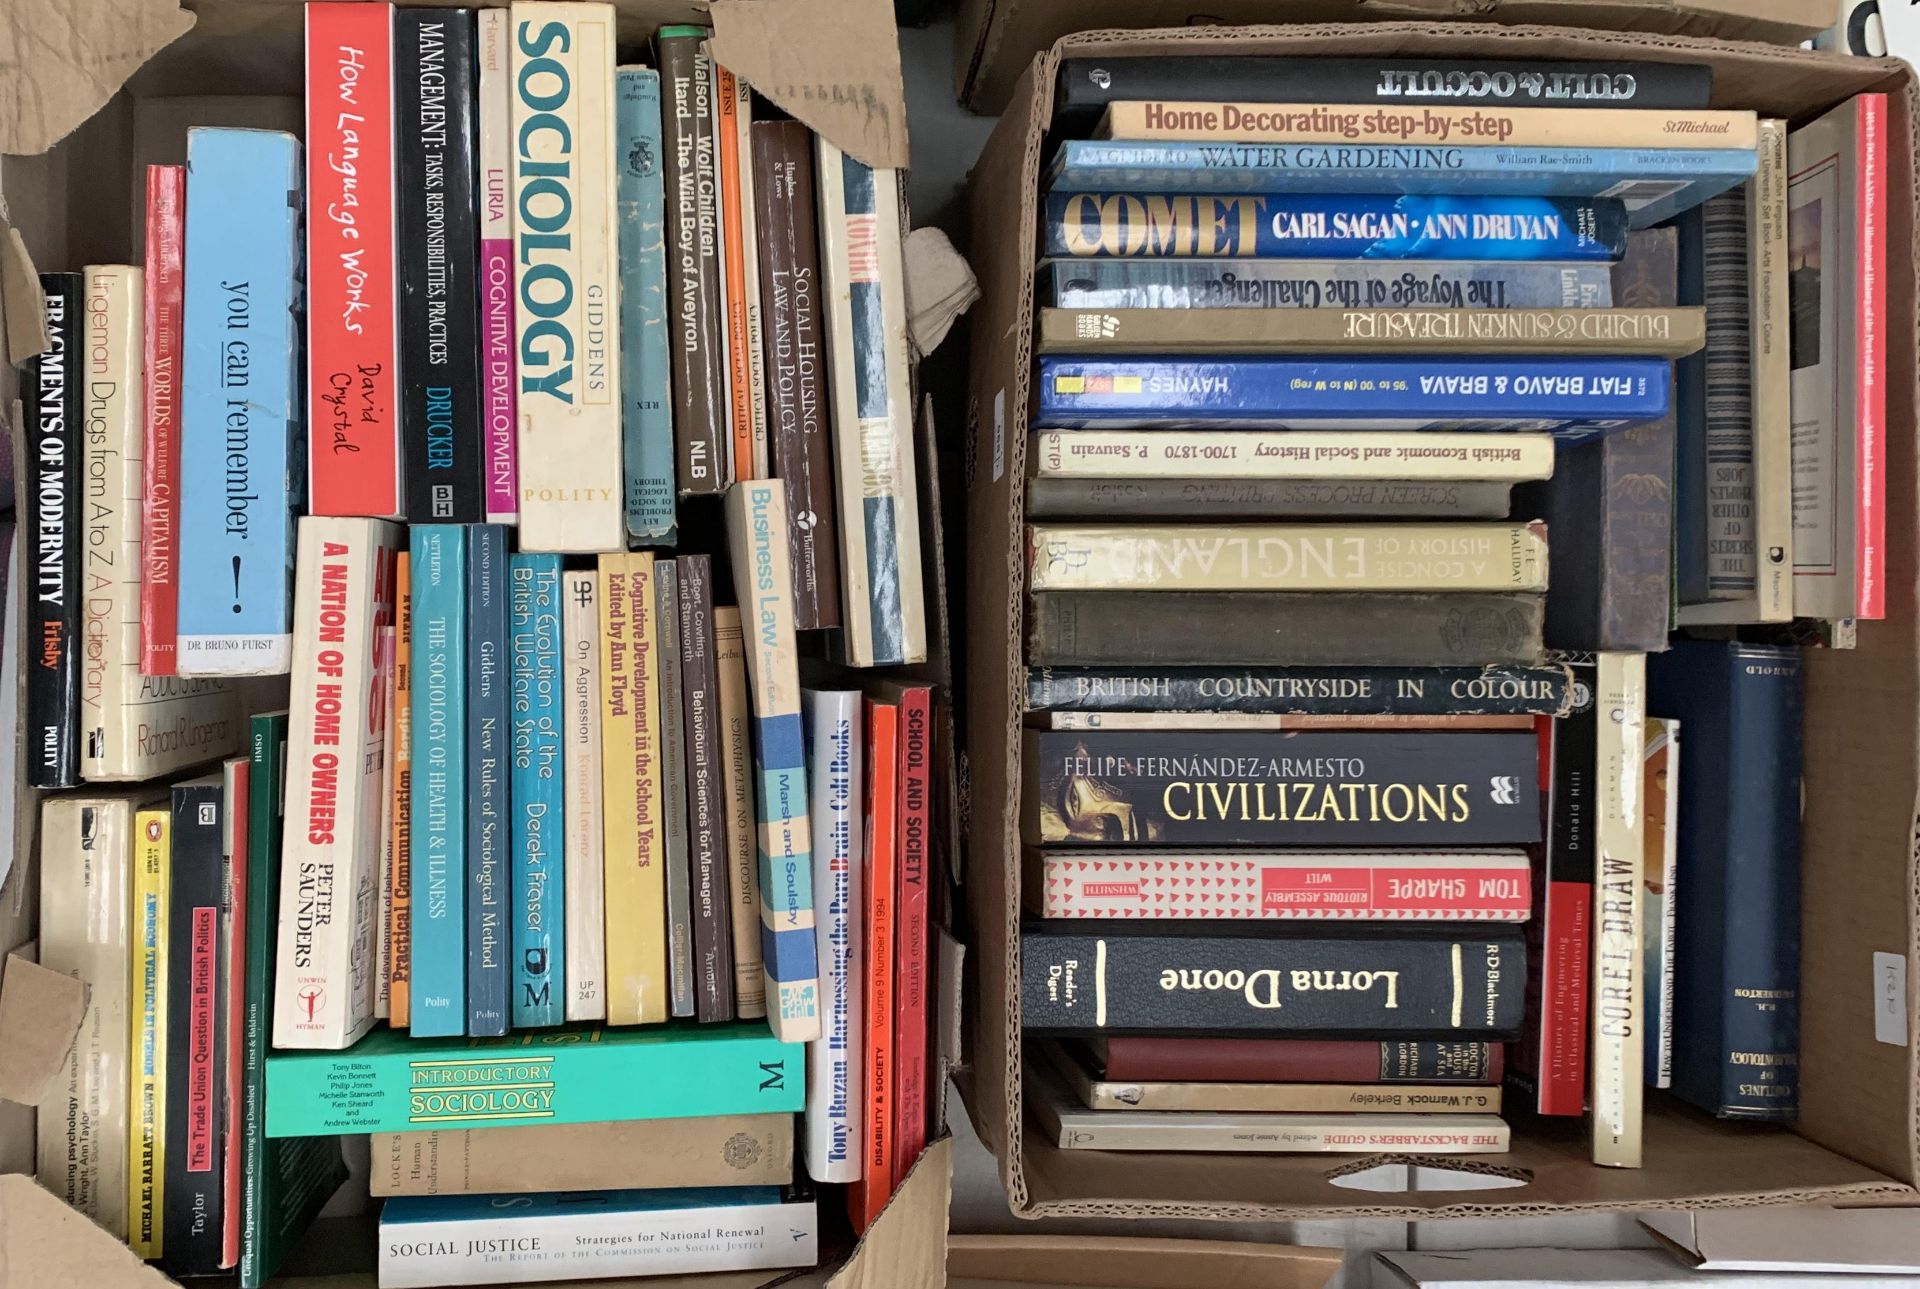 Contents to two boxes, books on sociology, Business history, Society etc.